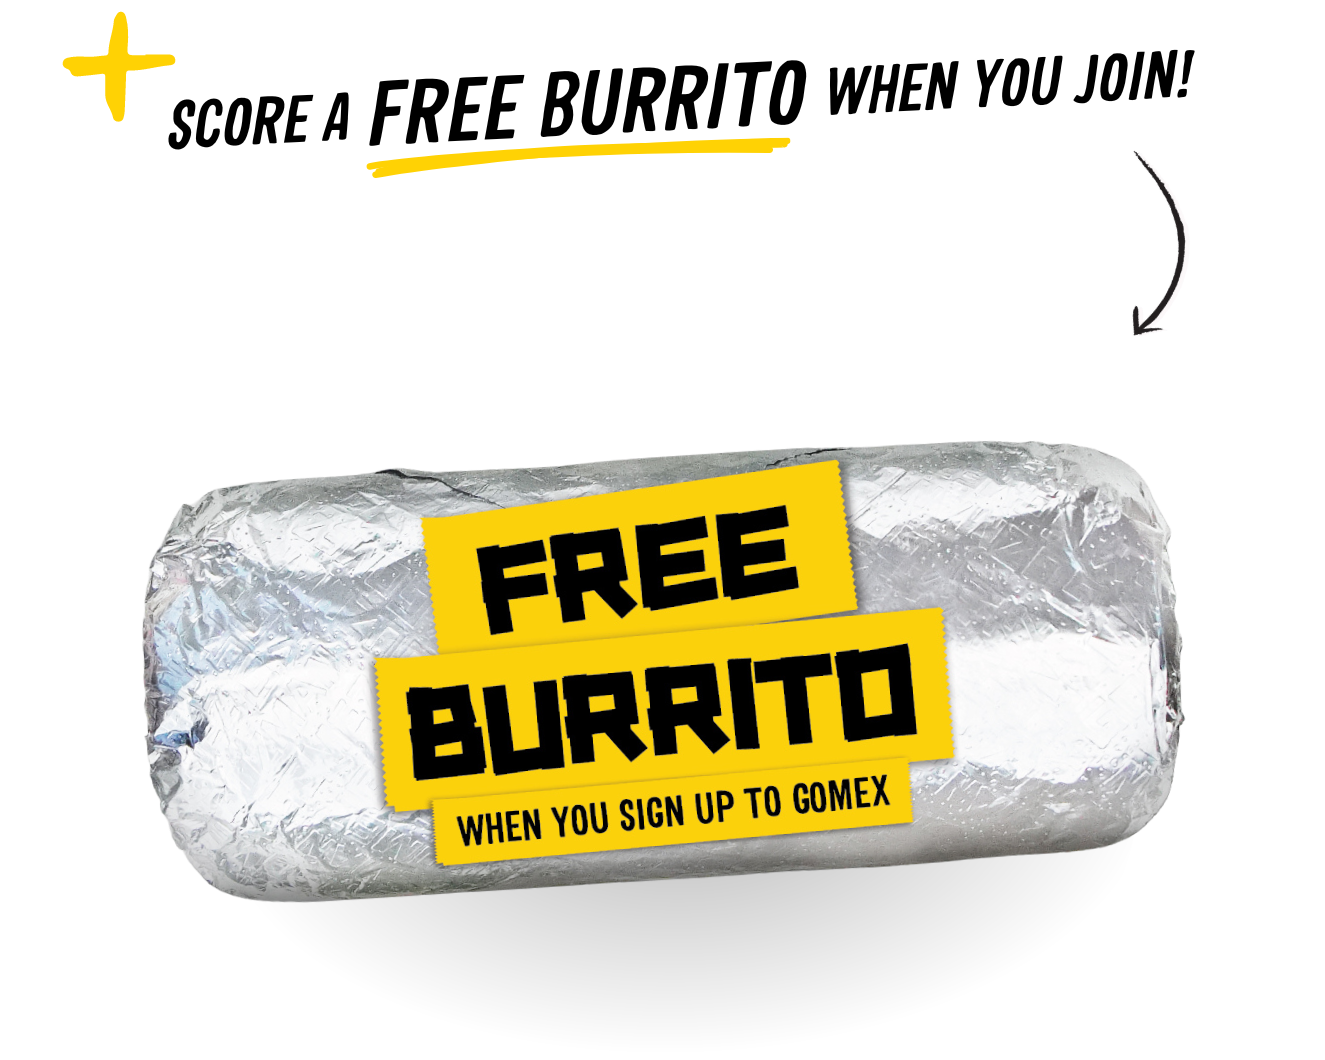 Score a FREE BURRITO when you join as a new user!>